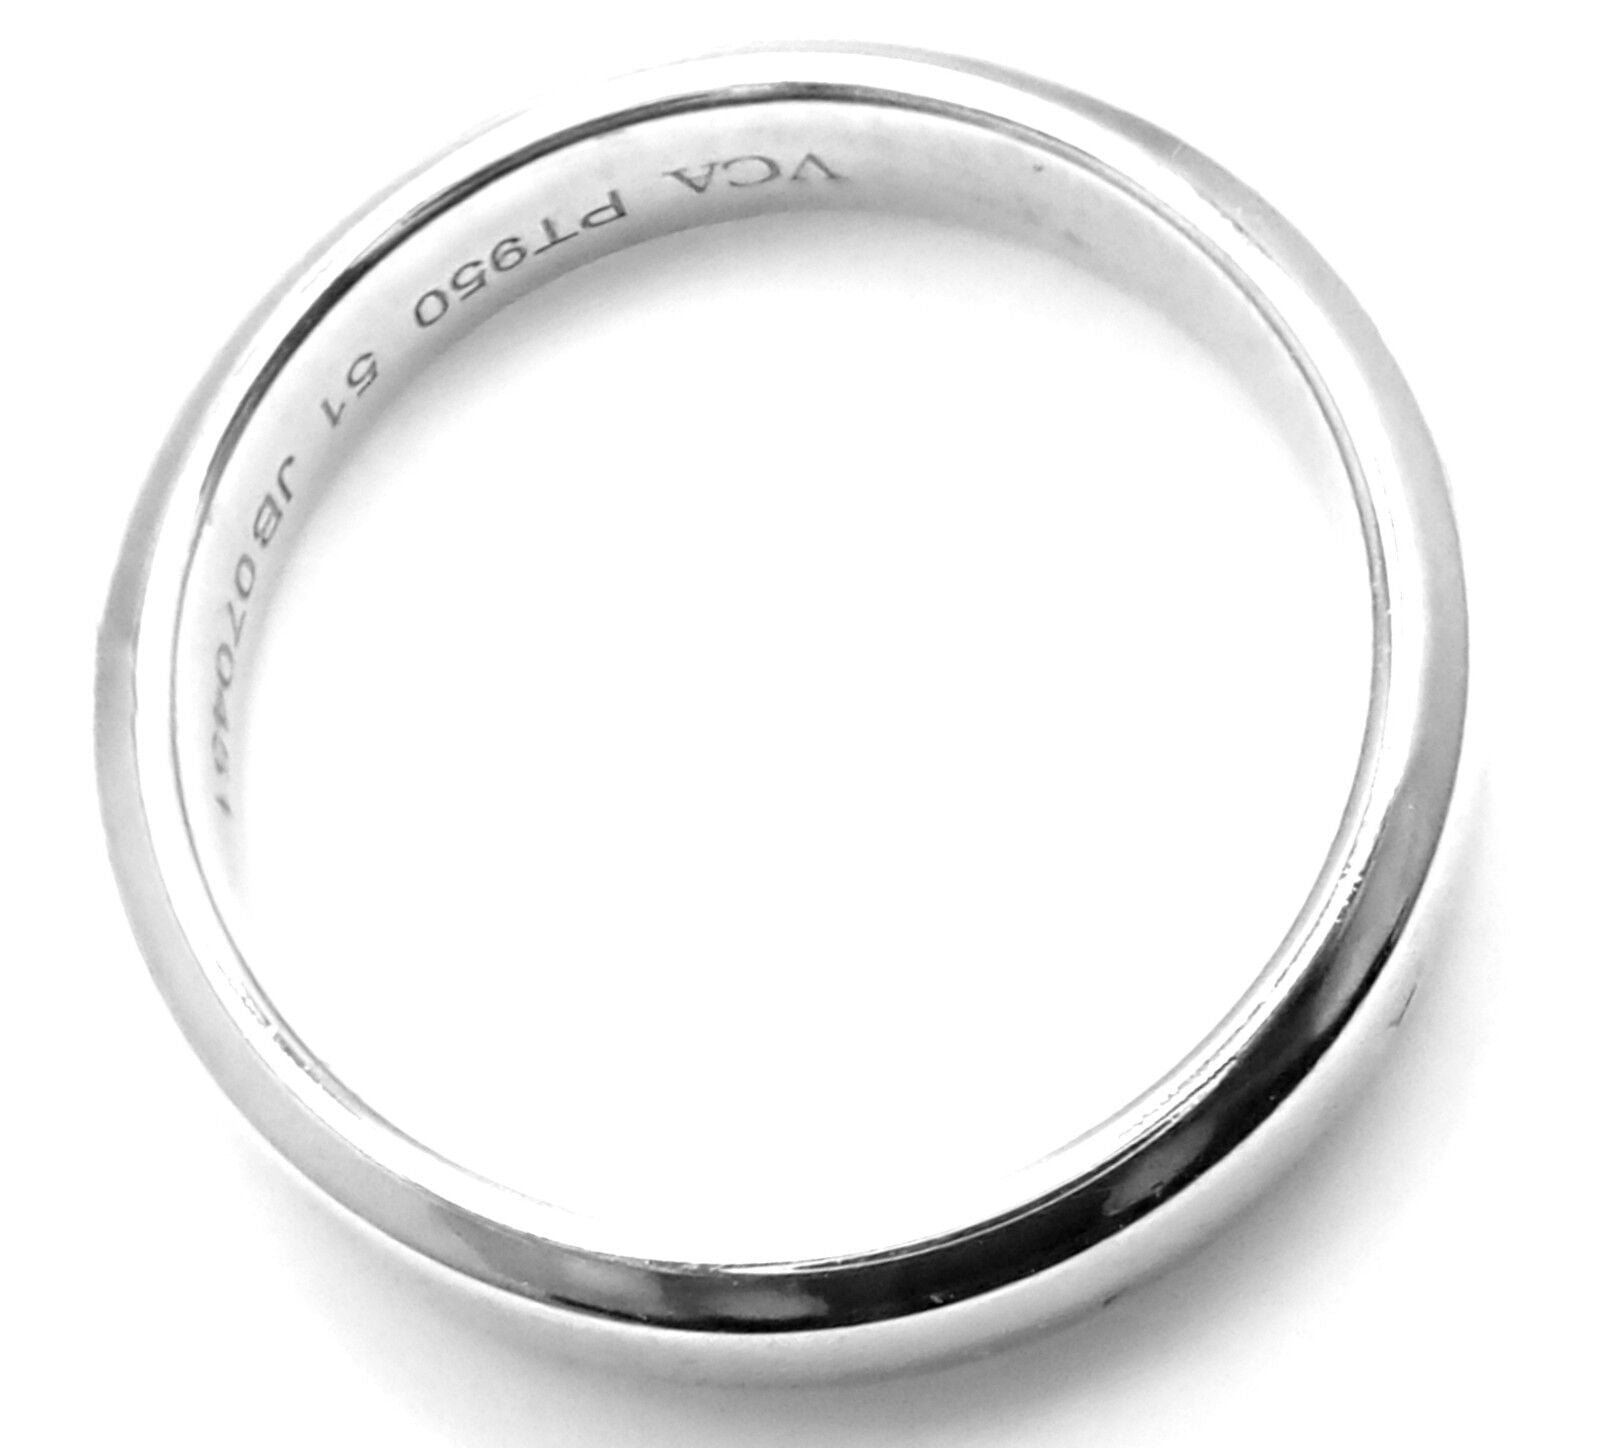 Van Cleef & Arpels Jewelry & Watches:Fine Jewelry:Rings Authentic! Van Cleef & Arpels Toujours Platinum 4mm Wide Band Ring Size 51